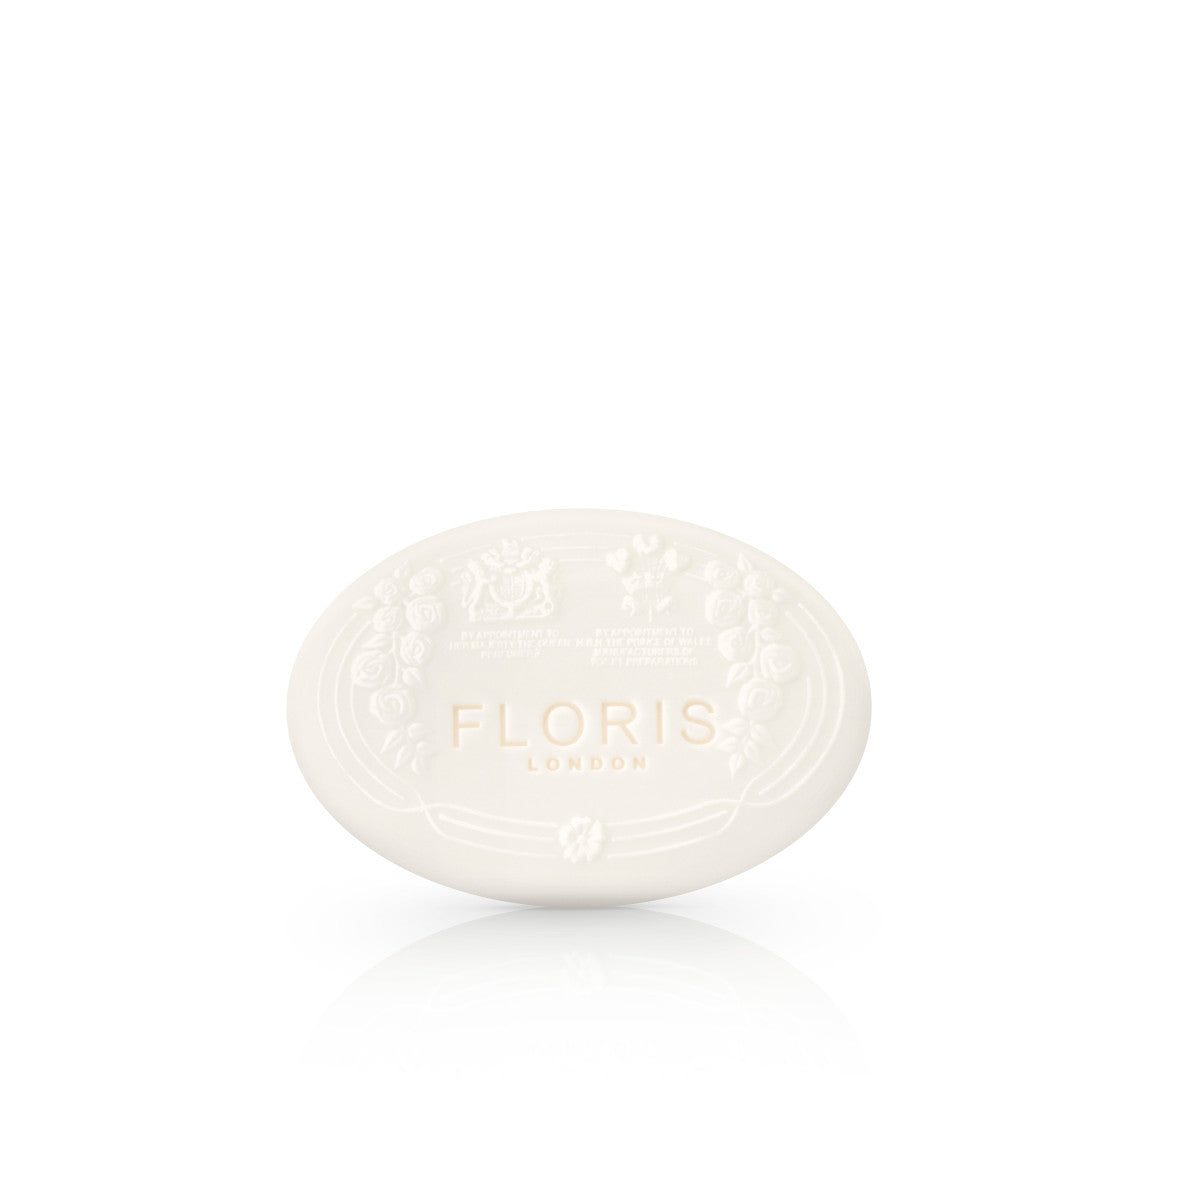 White Rose - Luxury Soap features an ivory oval shape with an embossed floral design, "Floris London" text in gold on the front, and a hint of shea butter.